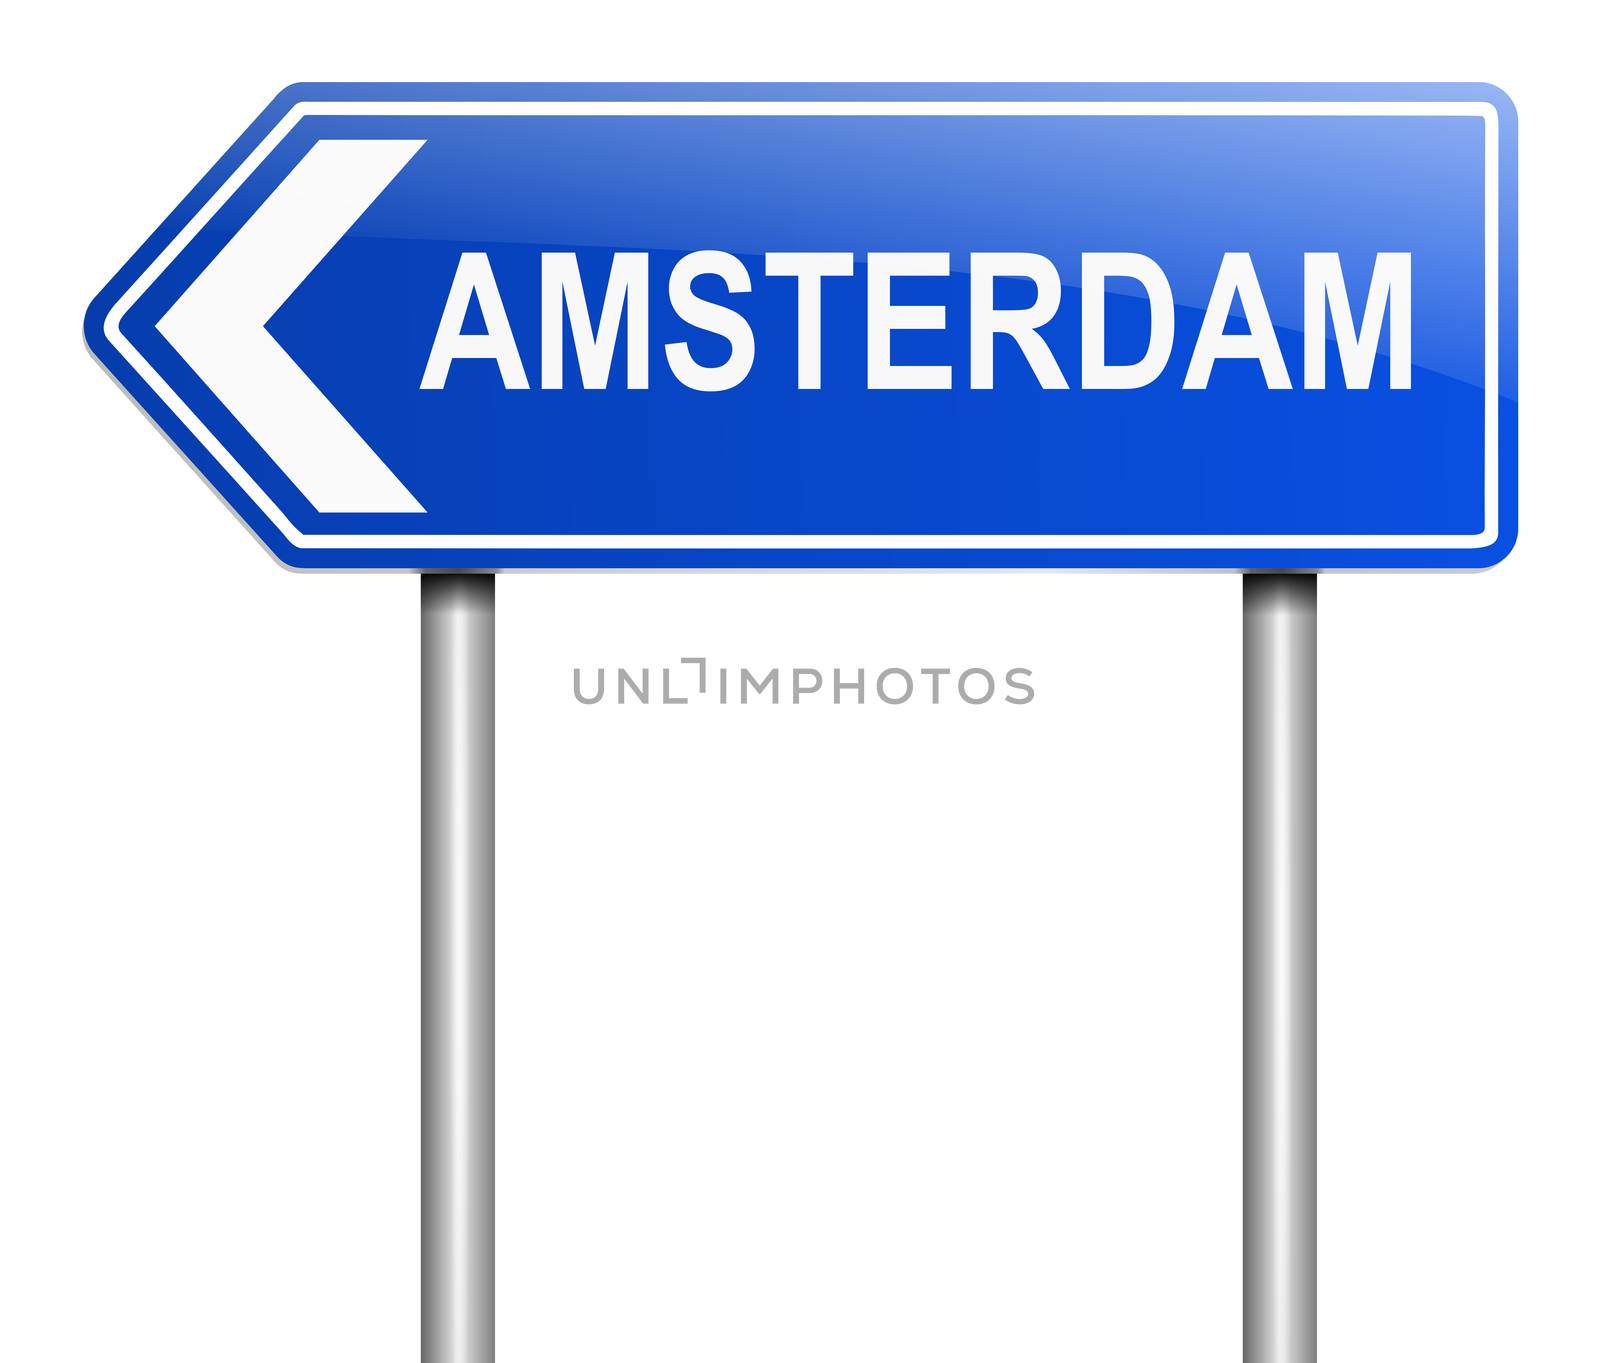 Illustration depicting a sign with an Amsterdam concept.